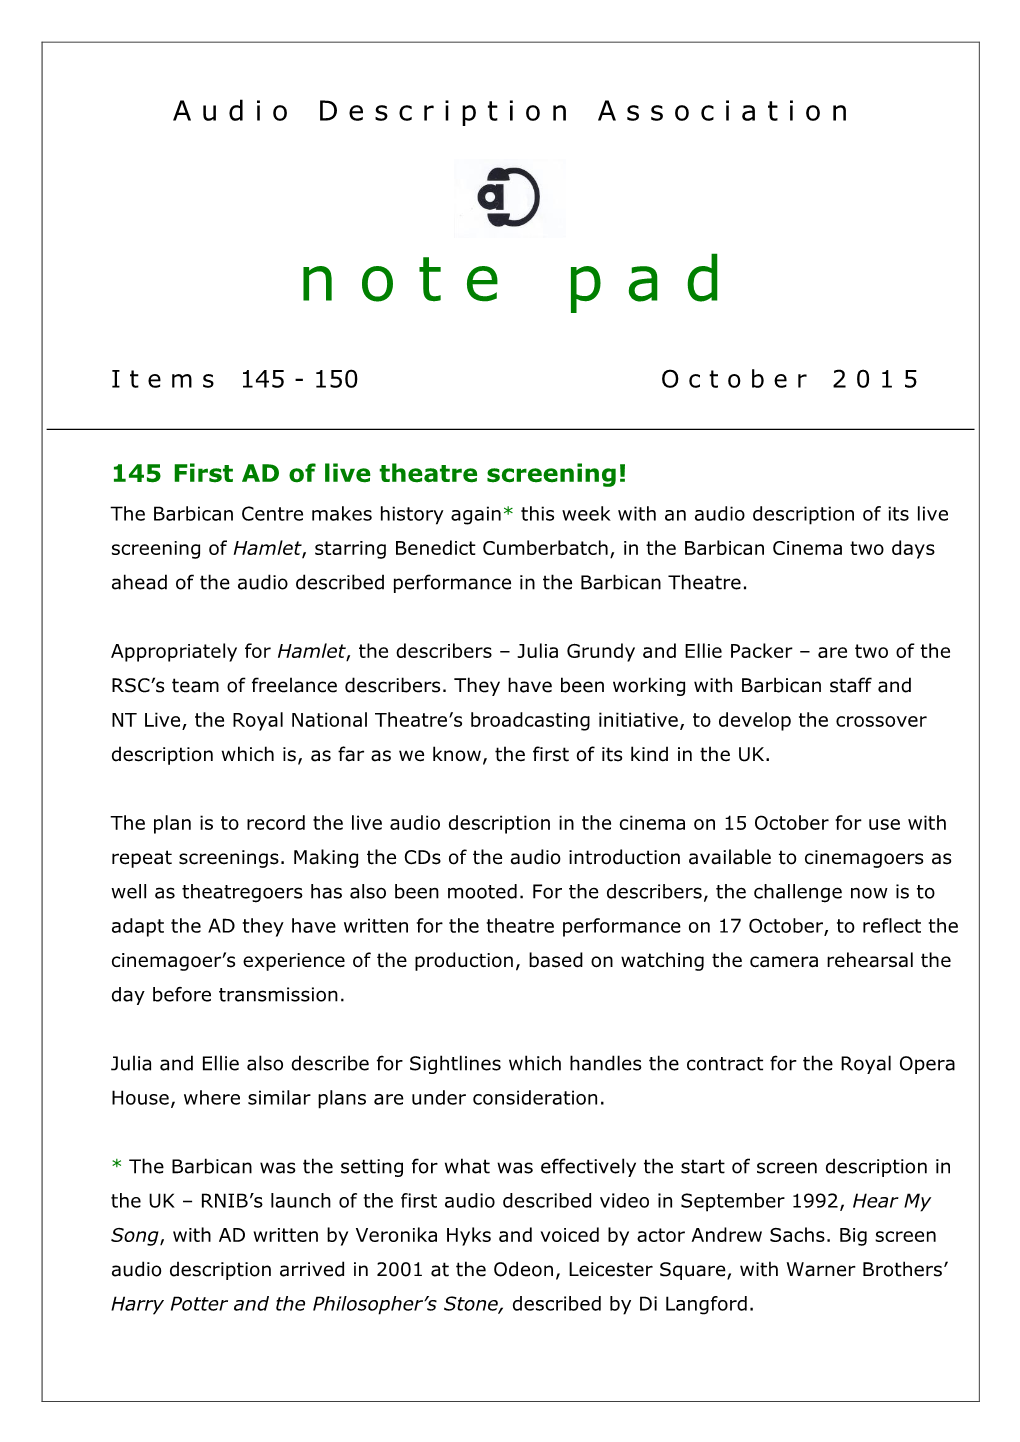 (Item 145 to 150) Note Pad October 2015